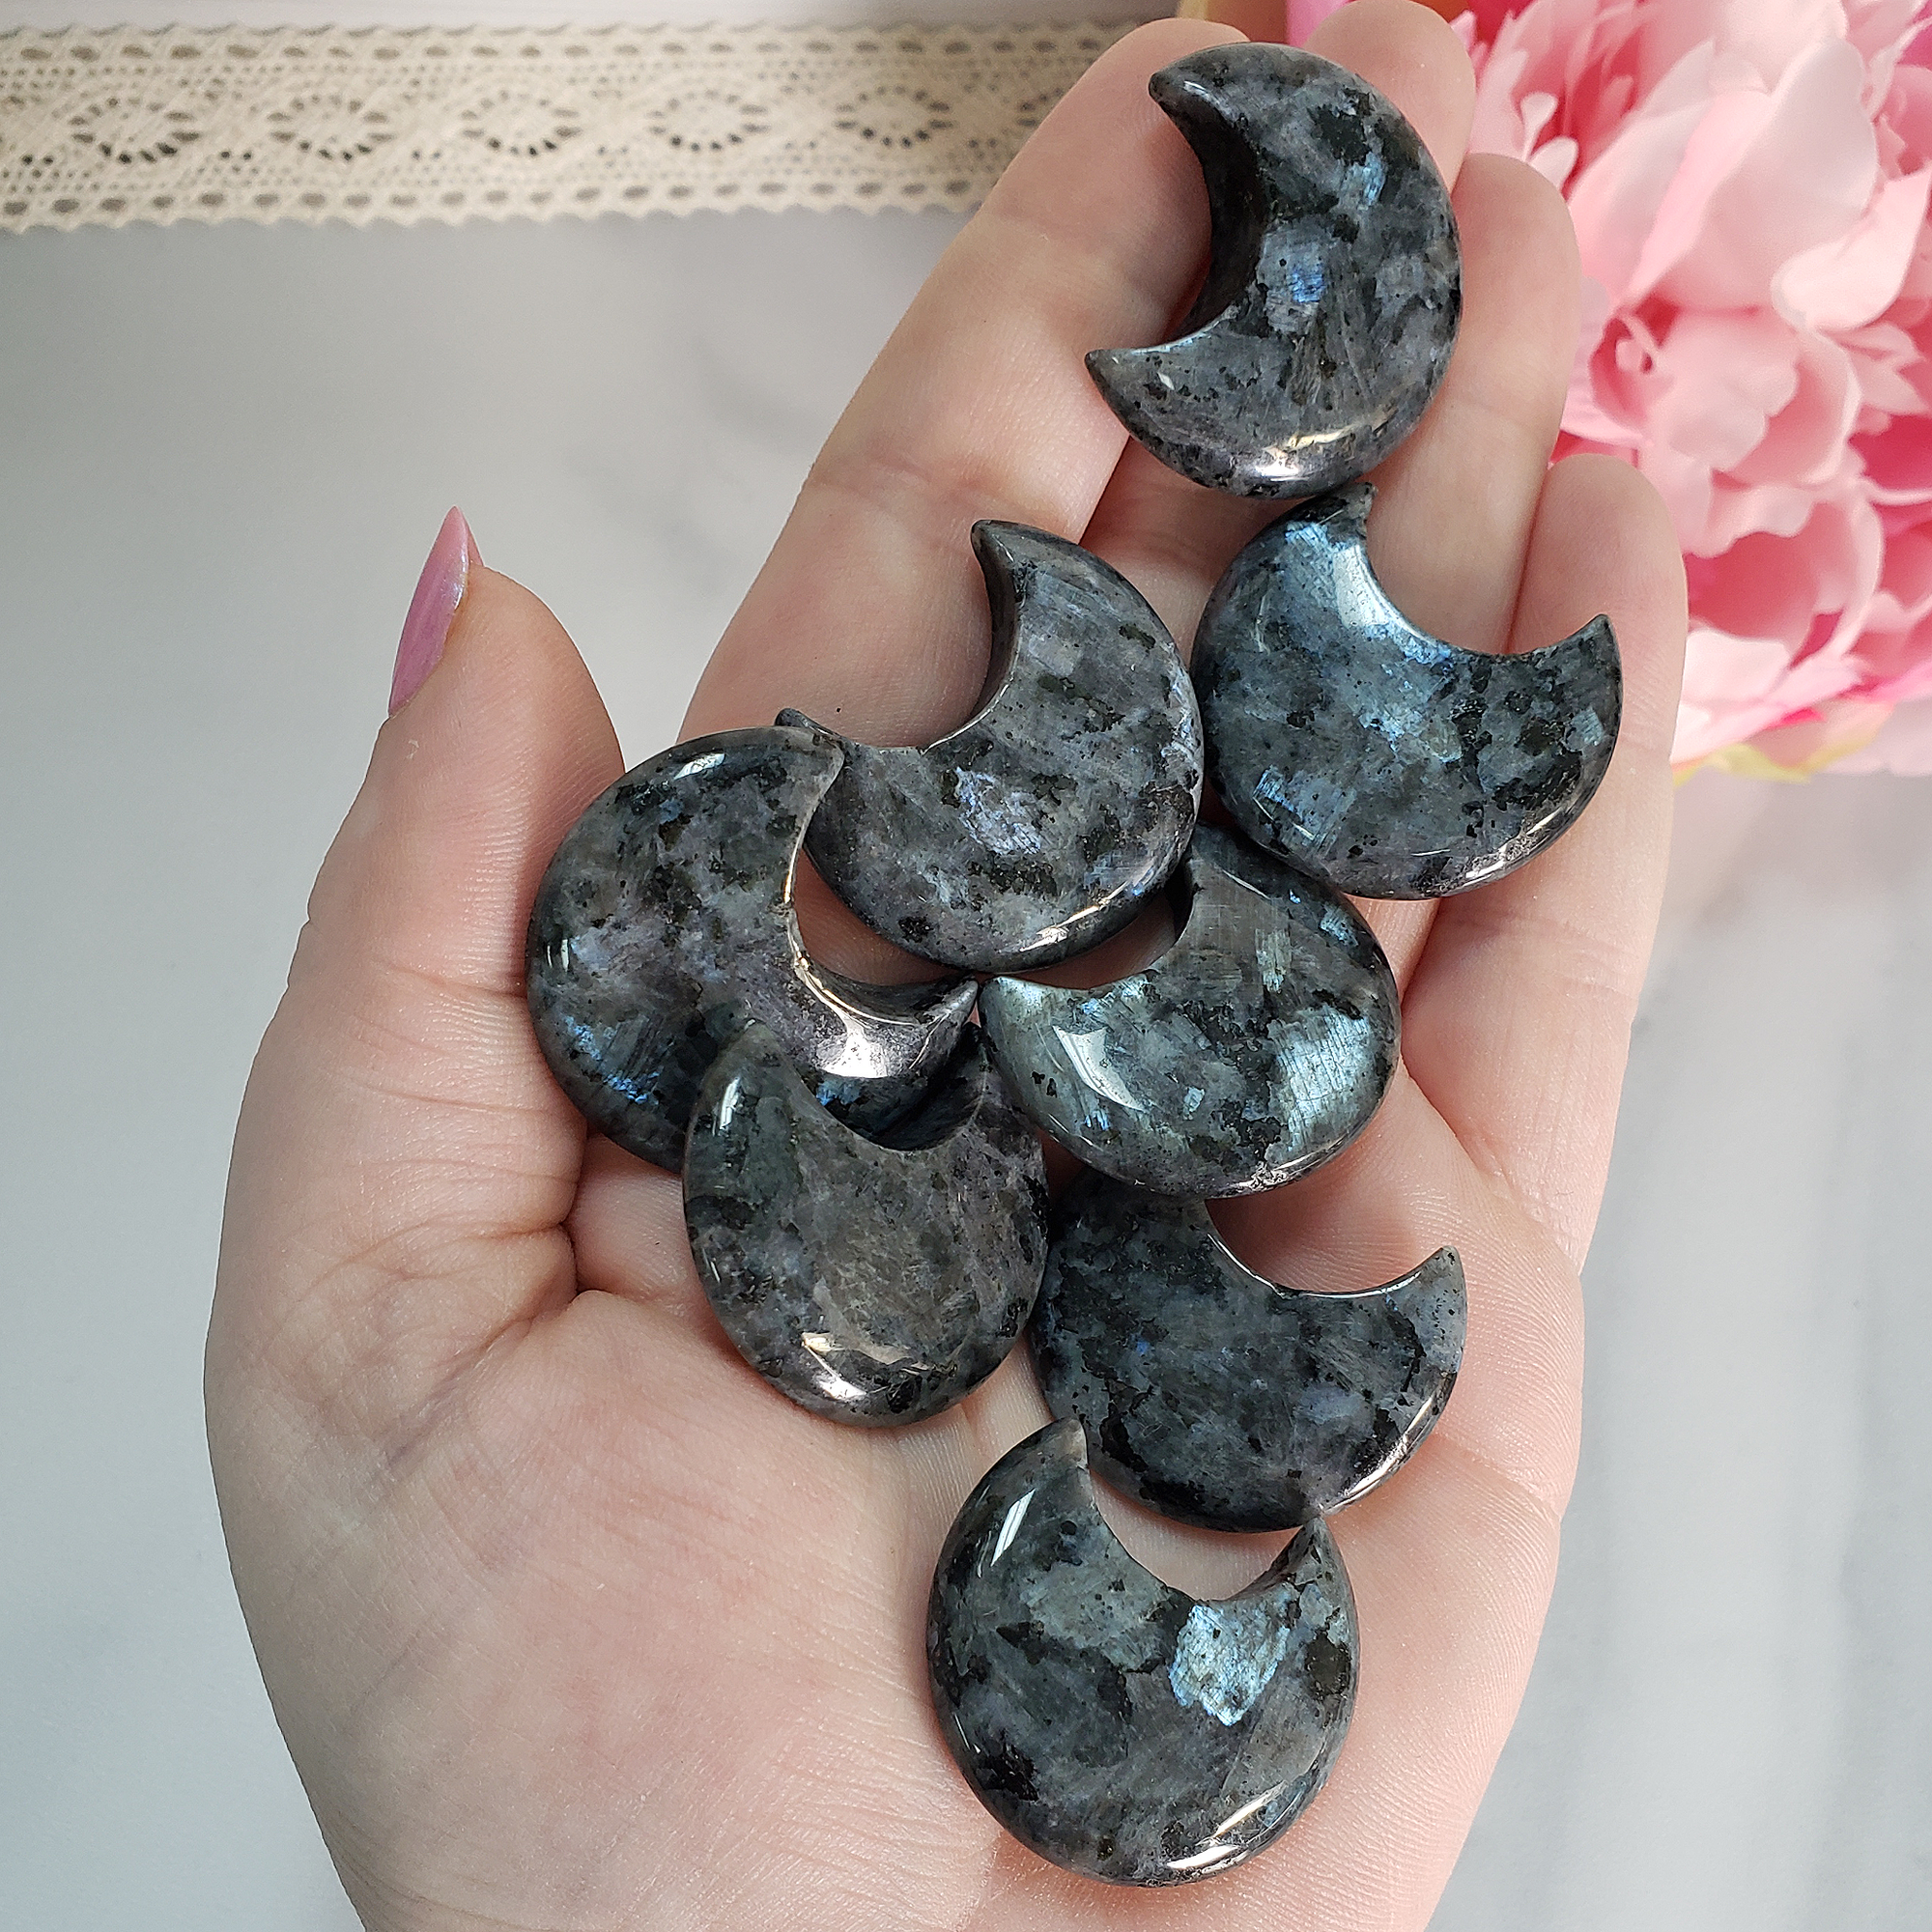 Larvikite Stone Natural Crystal Crescent Moon Carving Fidget Stone - Flashy Larvikite Crystal Moons in Hand